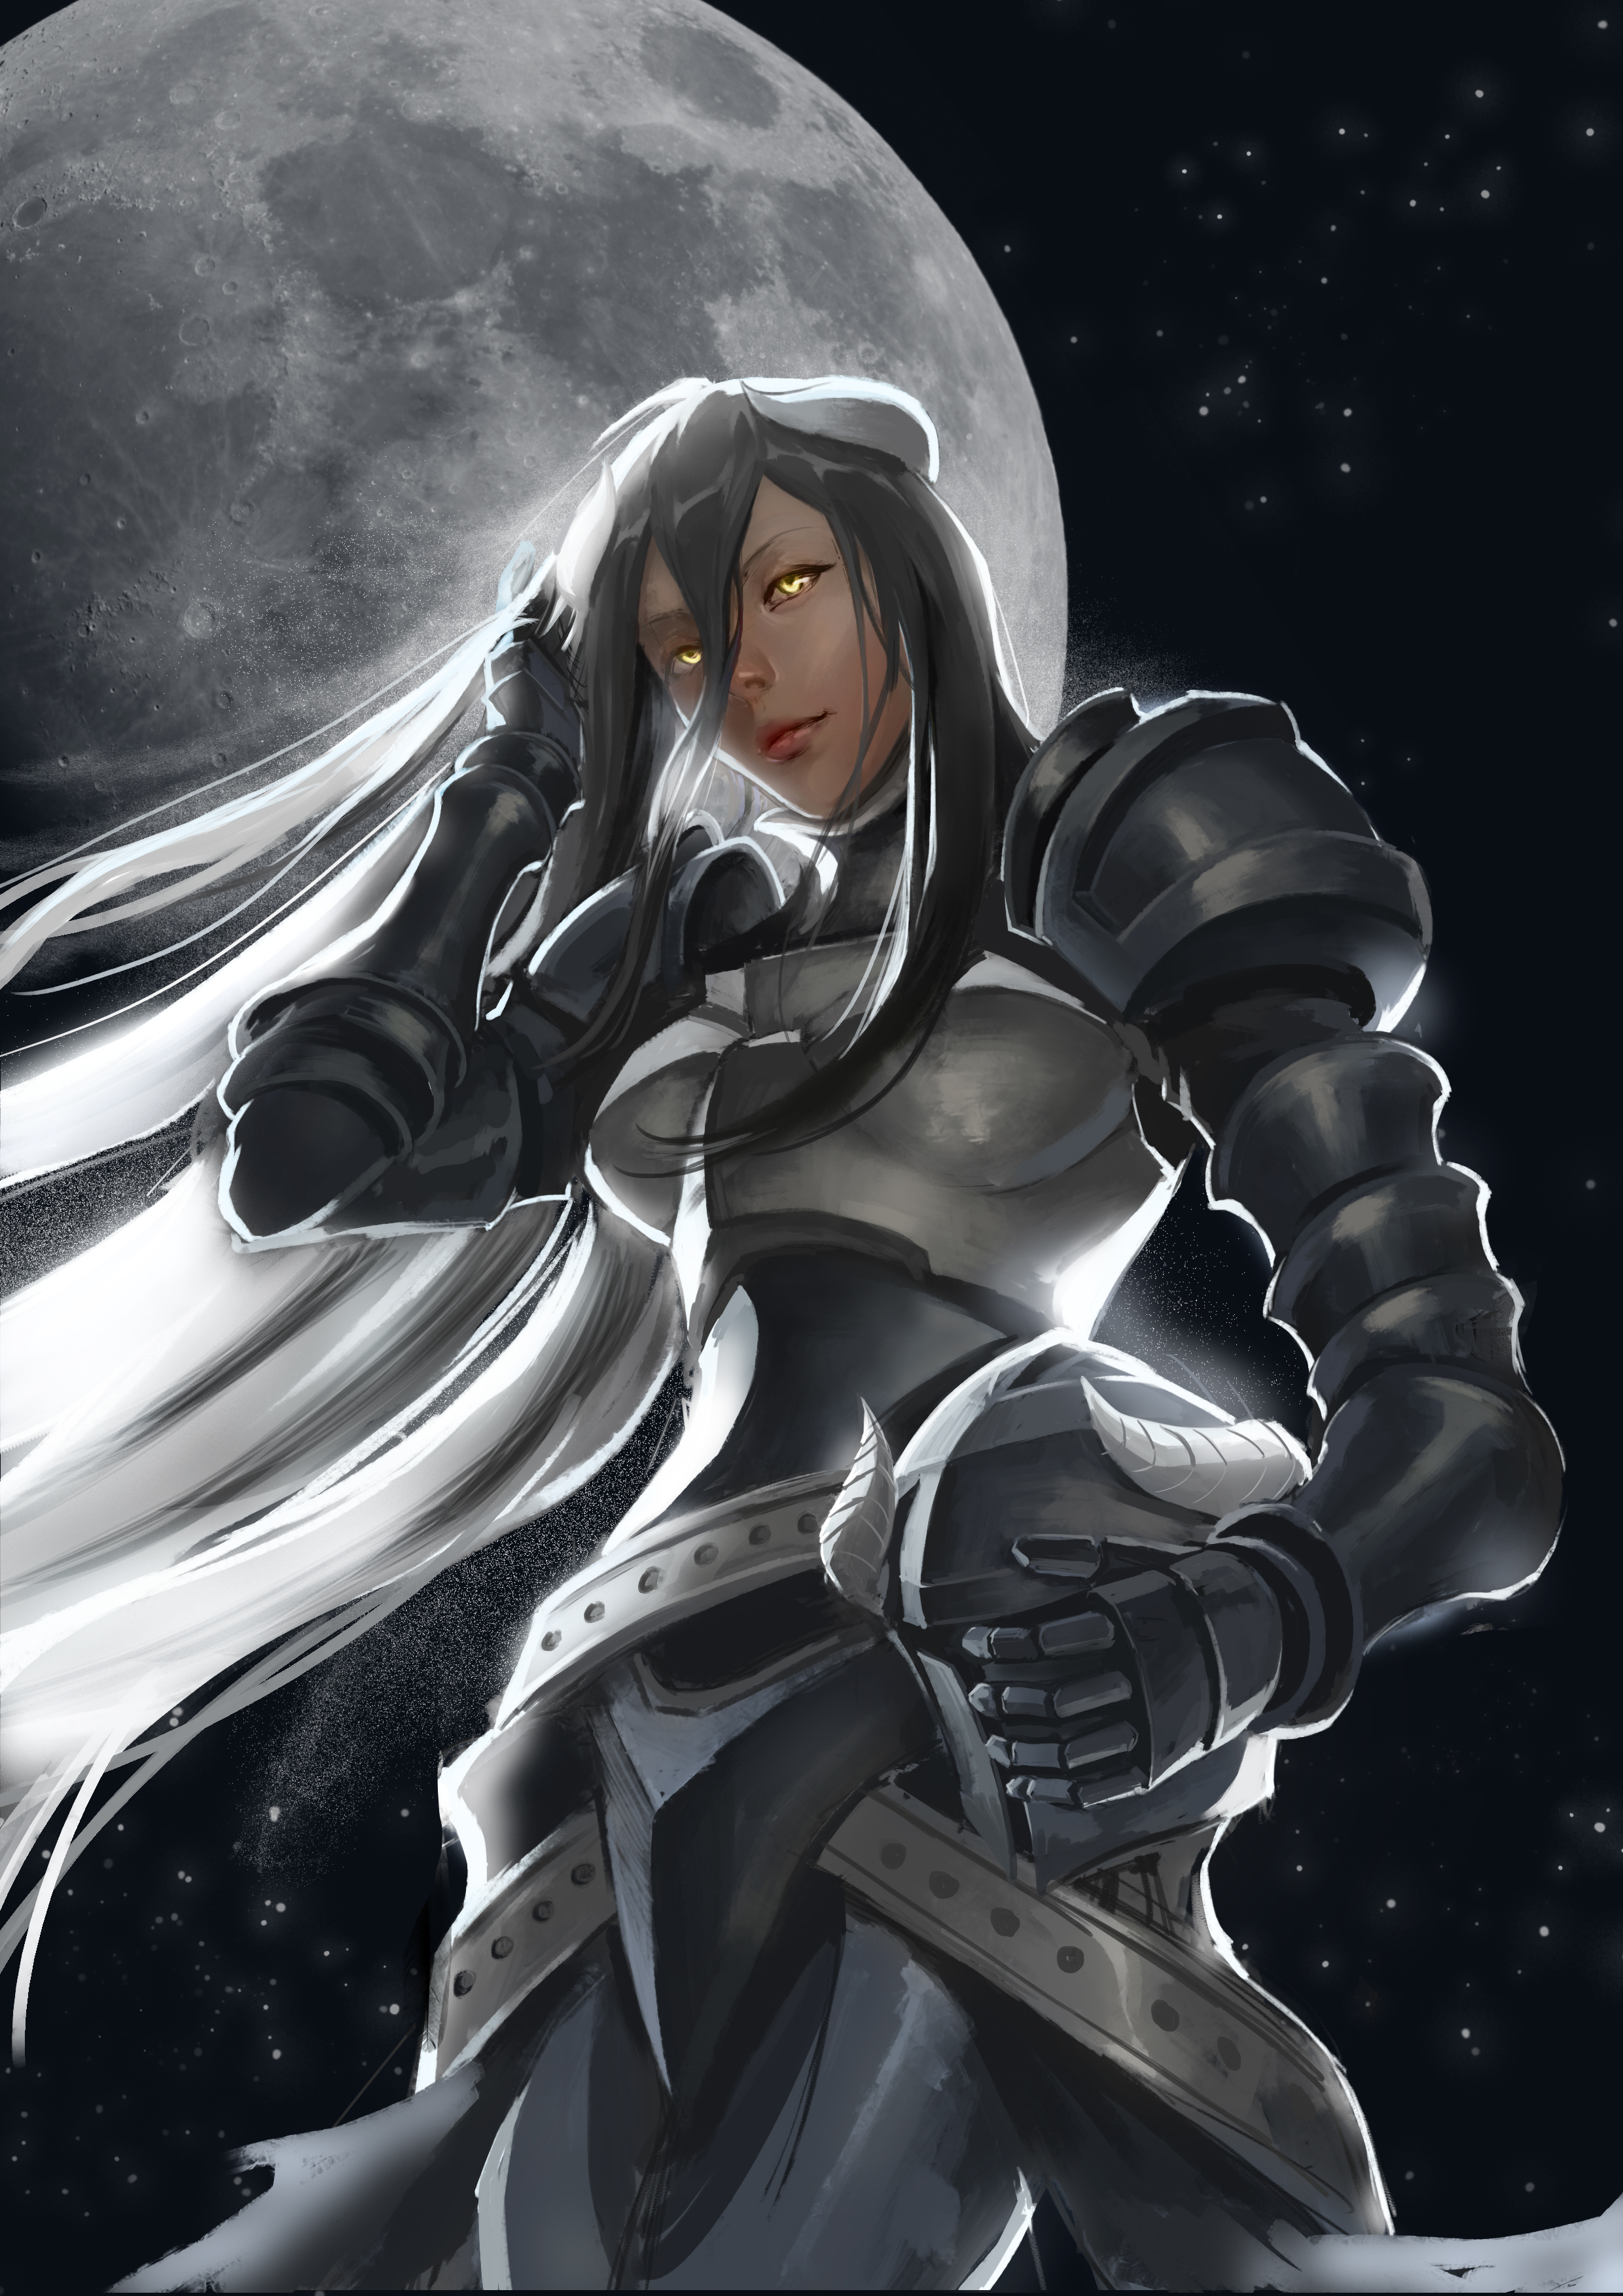 Overlord Anime Female Warrior Armored Woman Fantasy Armor Monster Girl Smiling Hair In Face Hair Blo 2480x3508